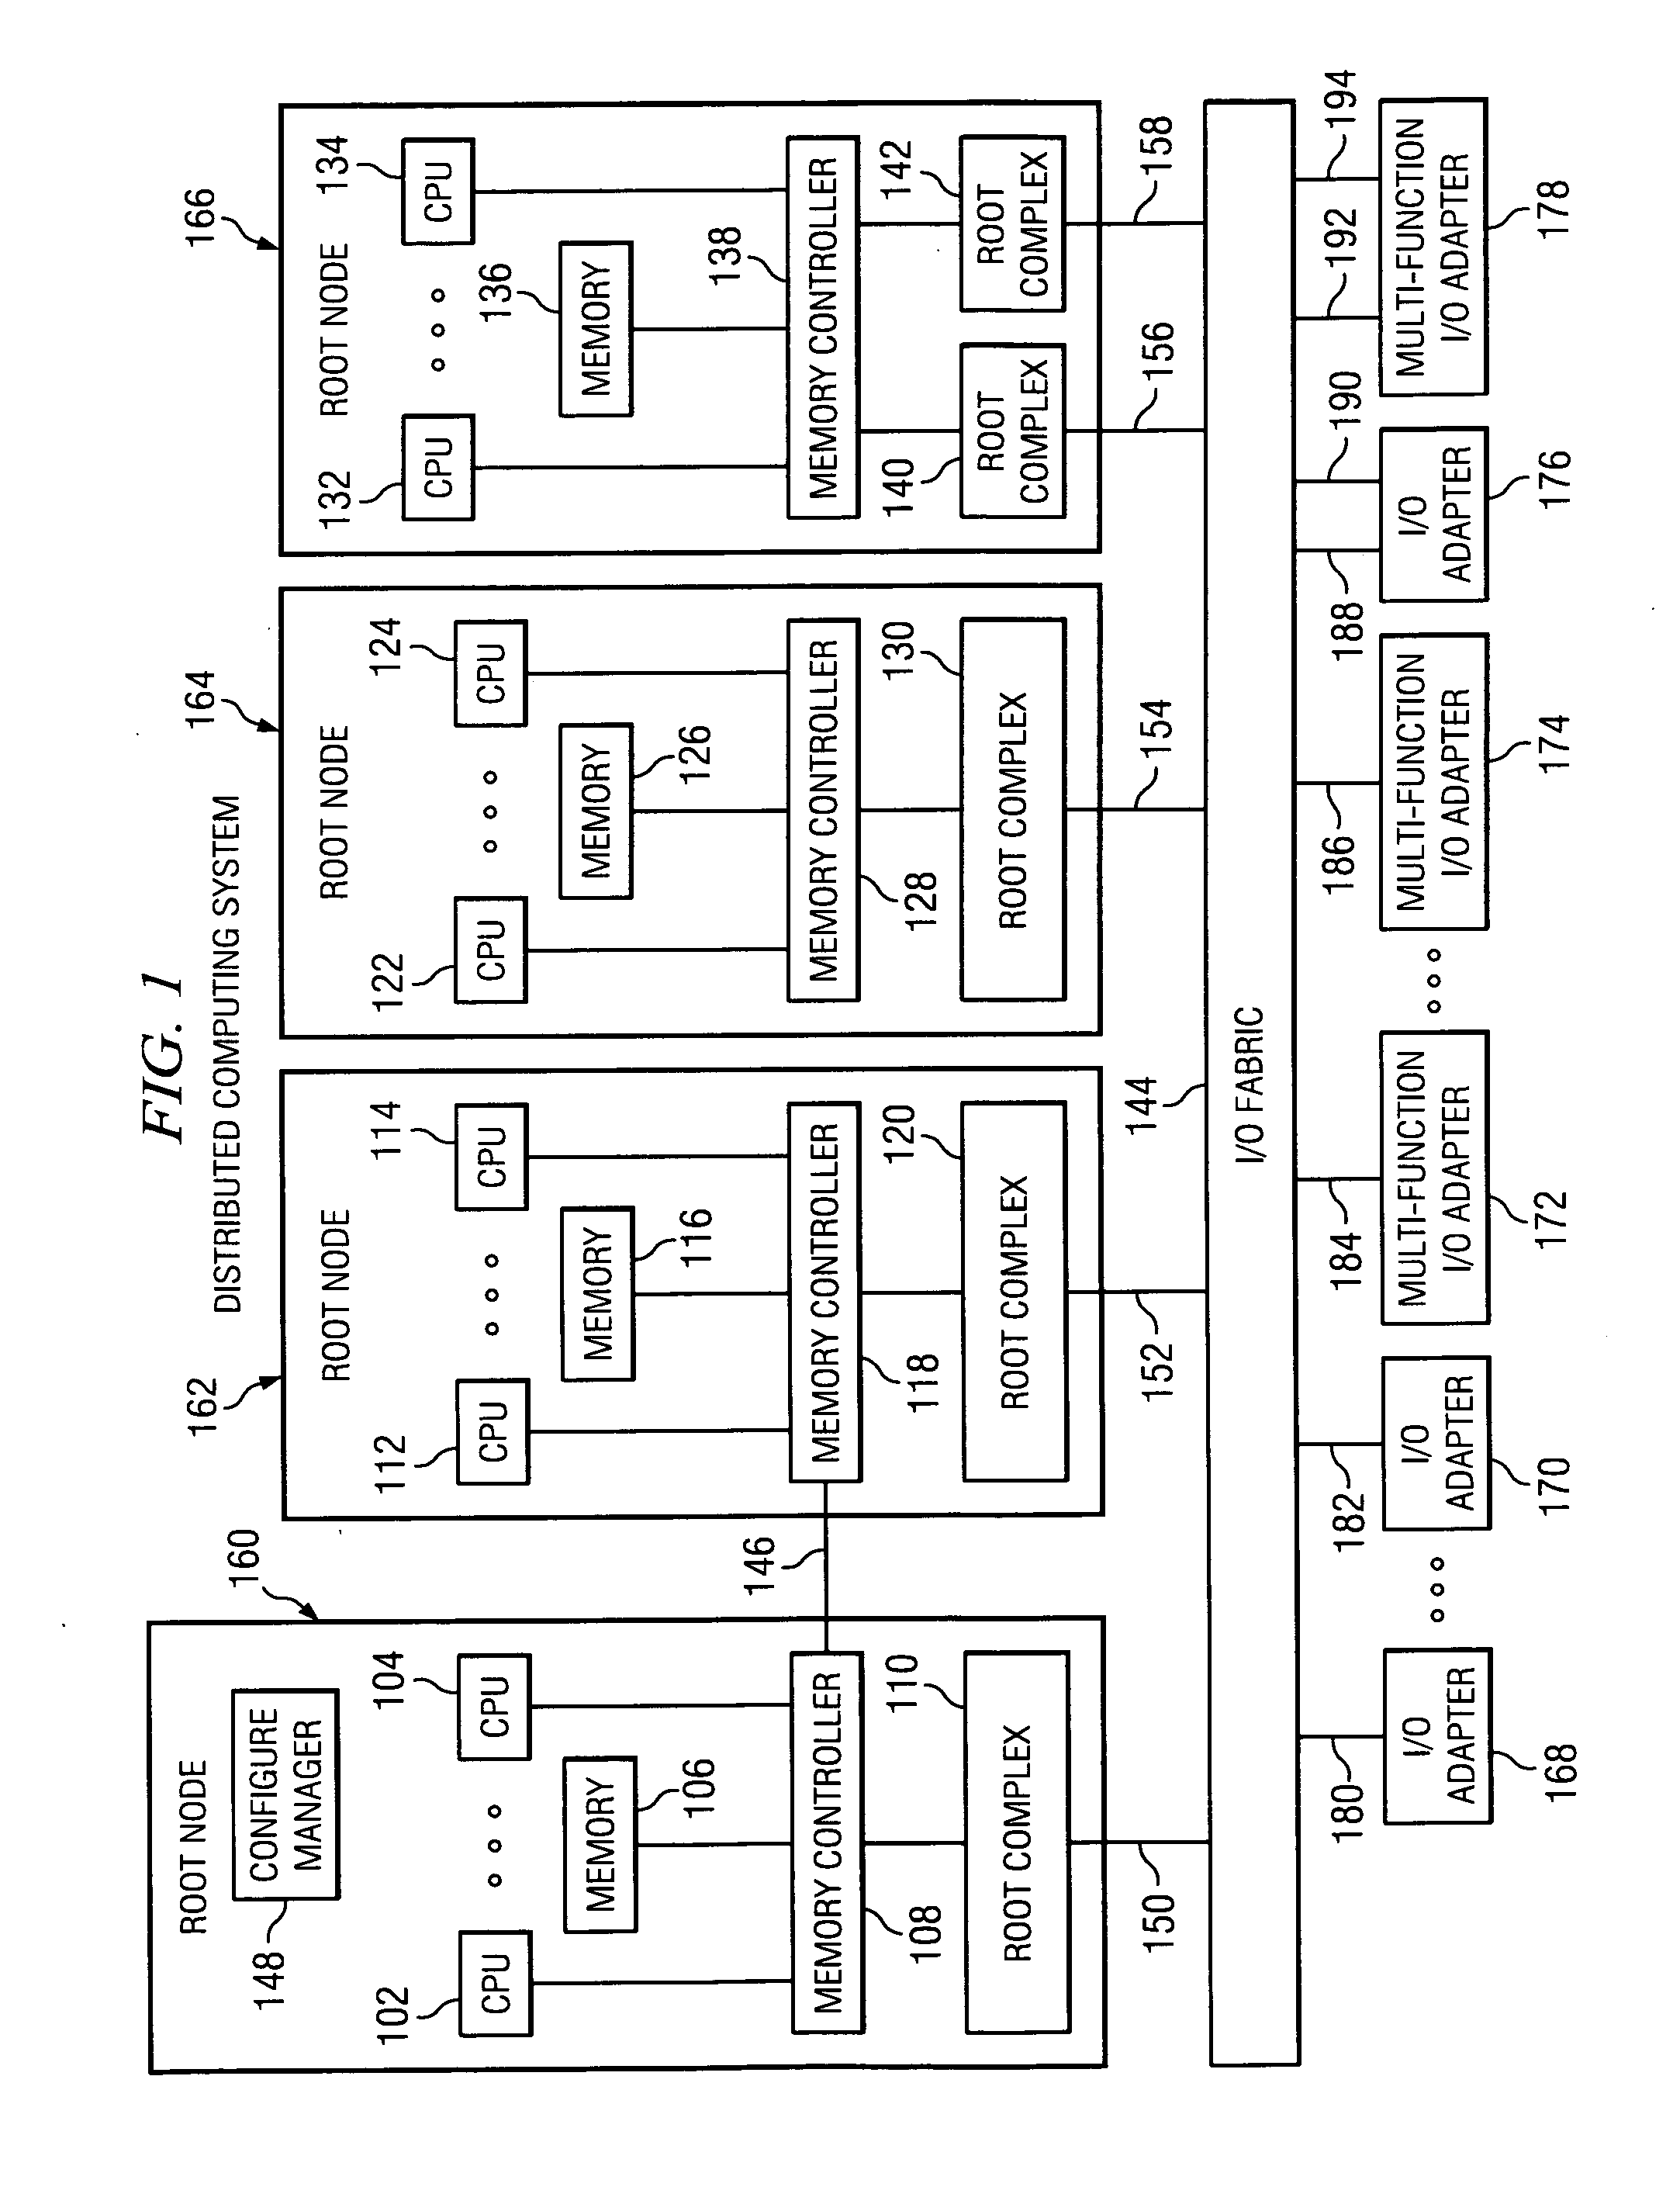 Method using a master node to control I/O fabric configuration in a multi-host environment